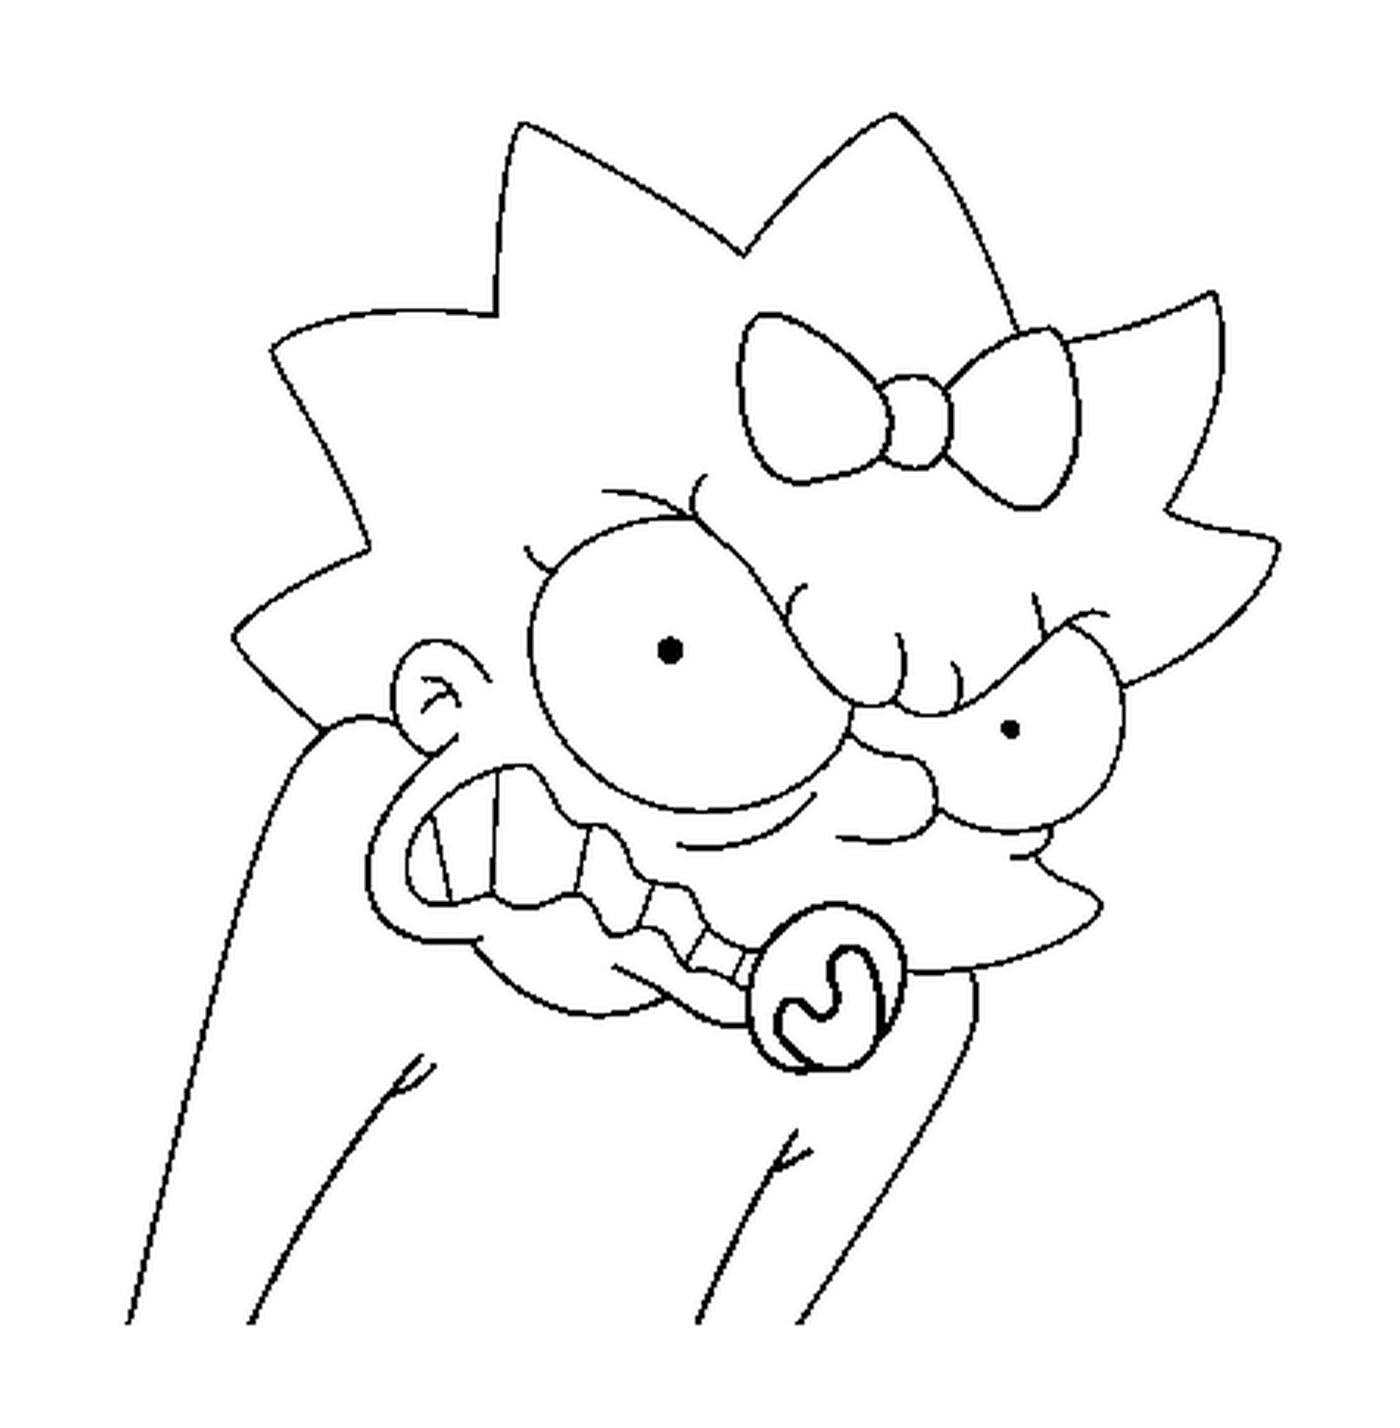  Maggie Simpson angry 